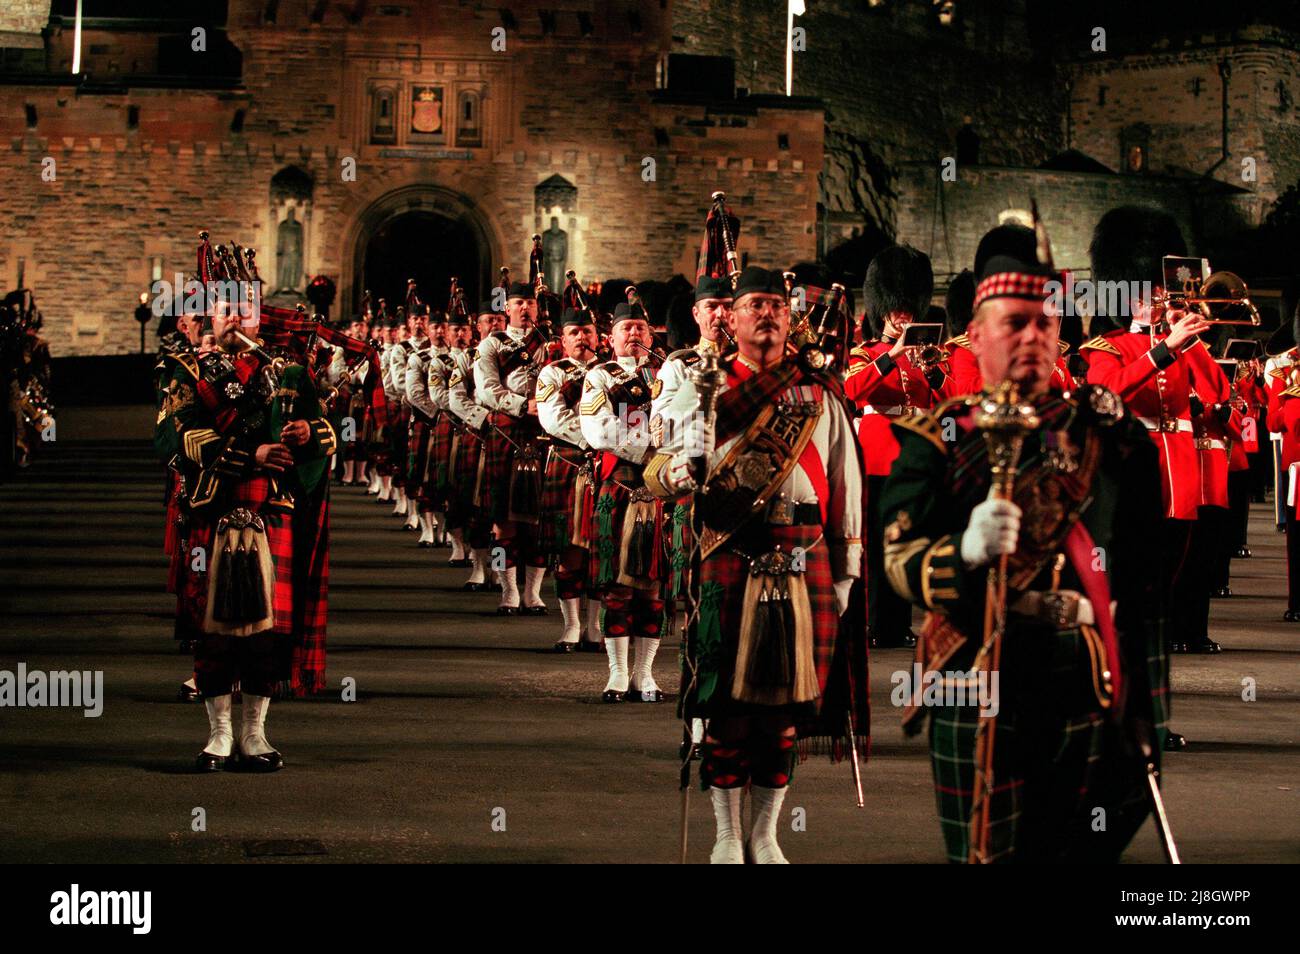 The Massed Pipes at the 1996 Edinburgh Military Tattoo on the esplanade of Edinburgh Castle, performed from 2nd to 24th August. Stock Photo